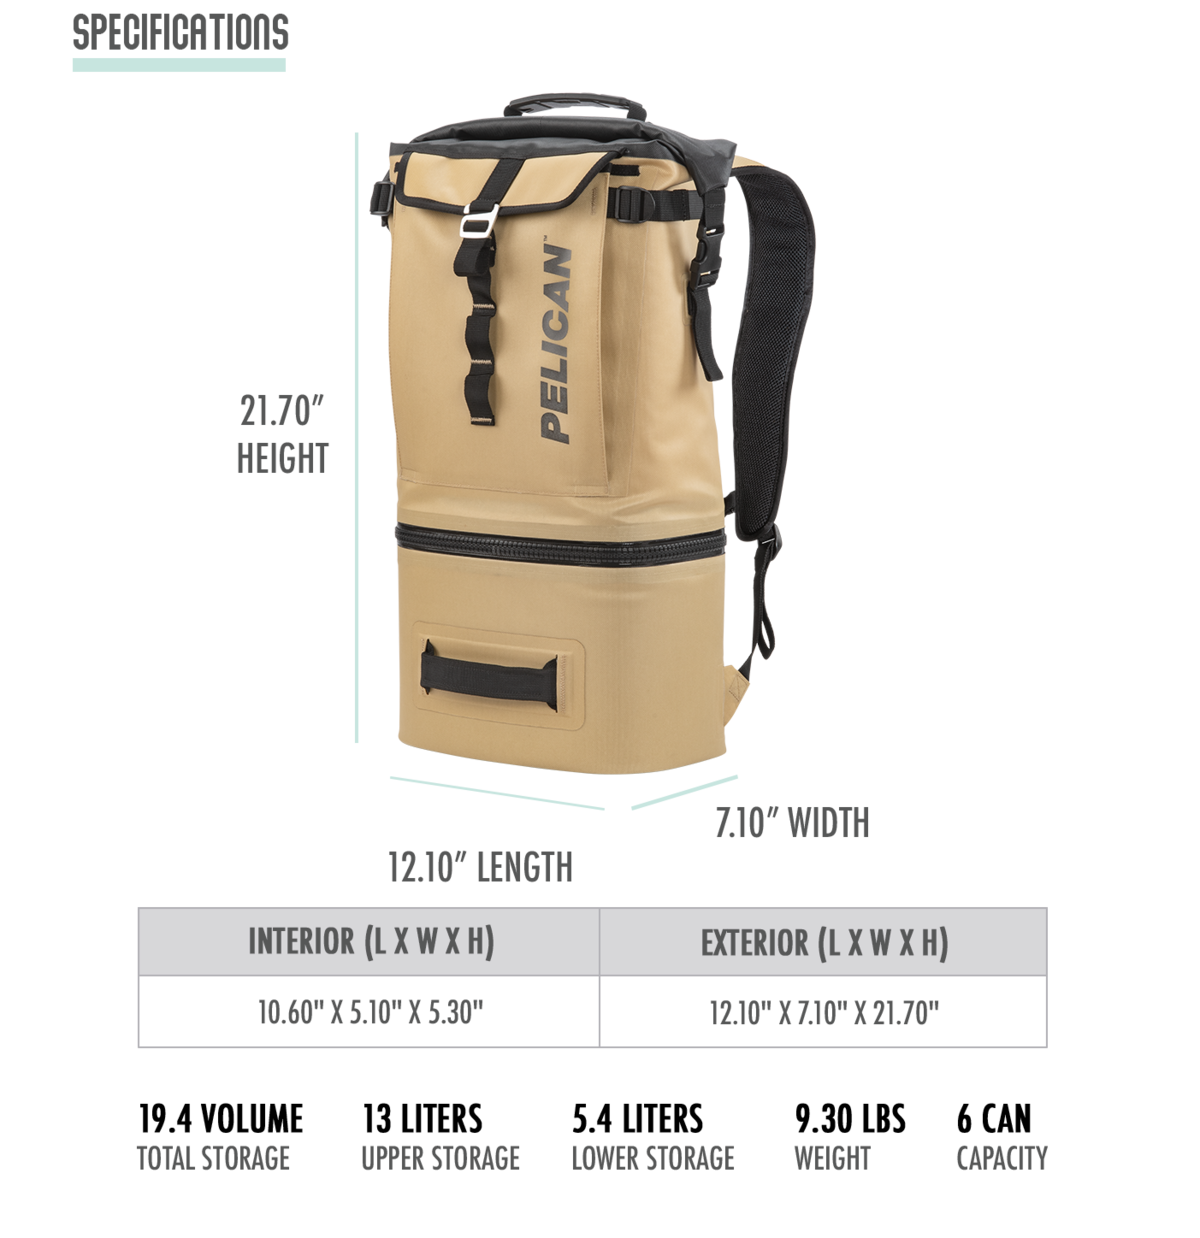 19.4 total volume. Upper section holds 13 litters. Lower section holds 5.4 liters or 6 cans with ice. Overall weight is 9.30 lbs. The Pelican Dayventure Cooker Backpack is 12.10" x 7.10" x 21.70"